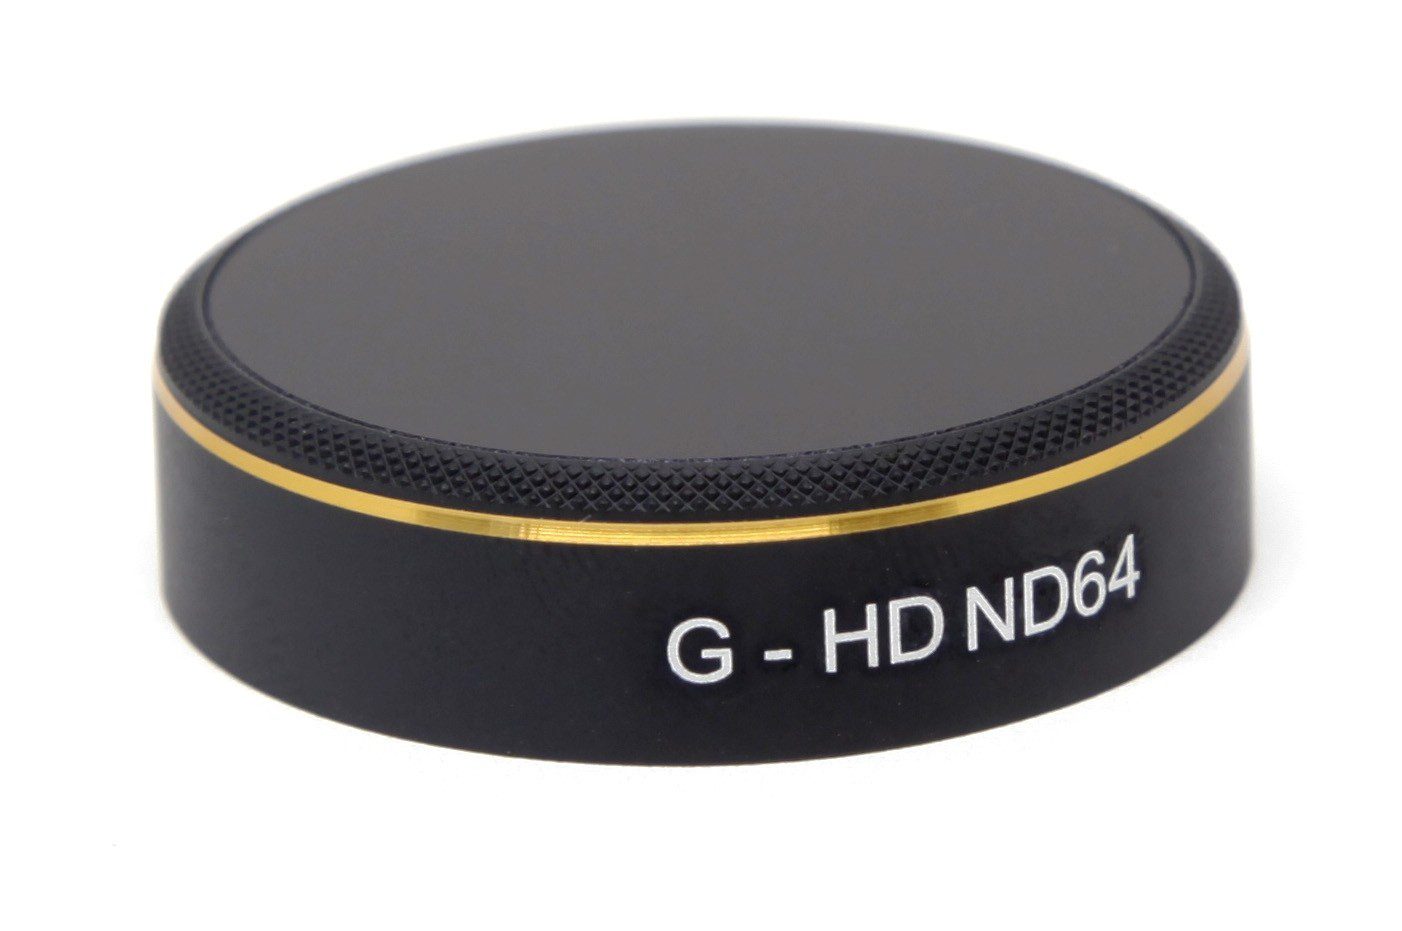 PGY HD ND64 Filter for Phantom 4 Pro / Pro+